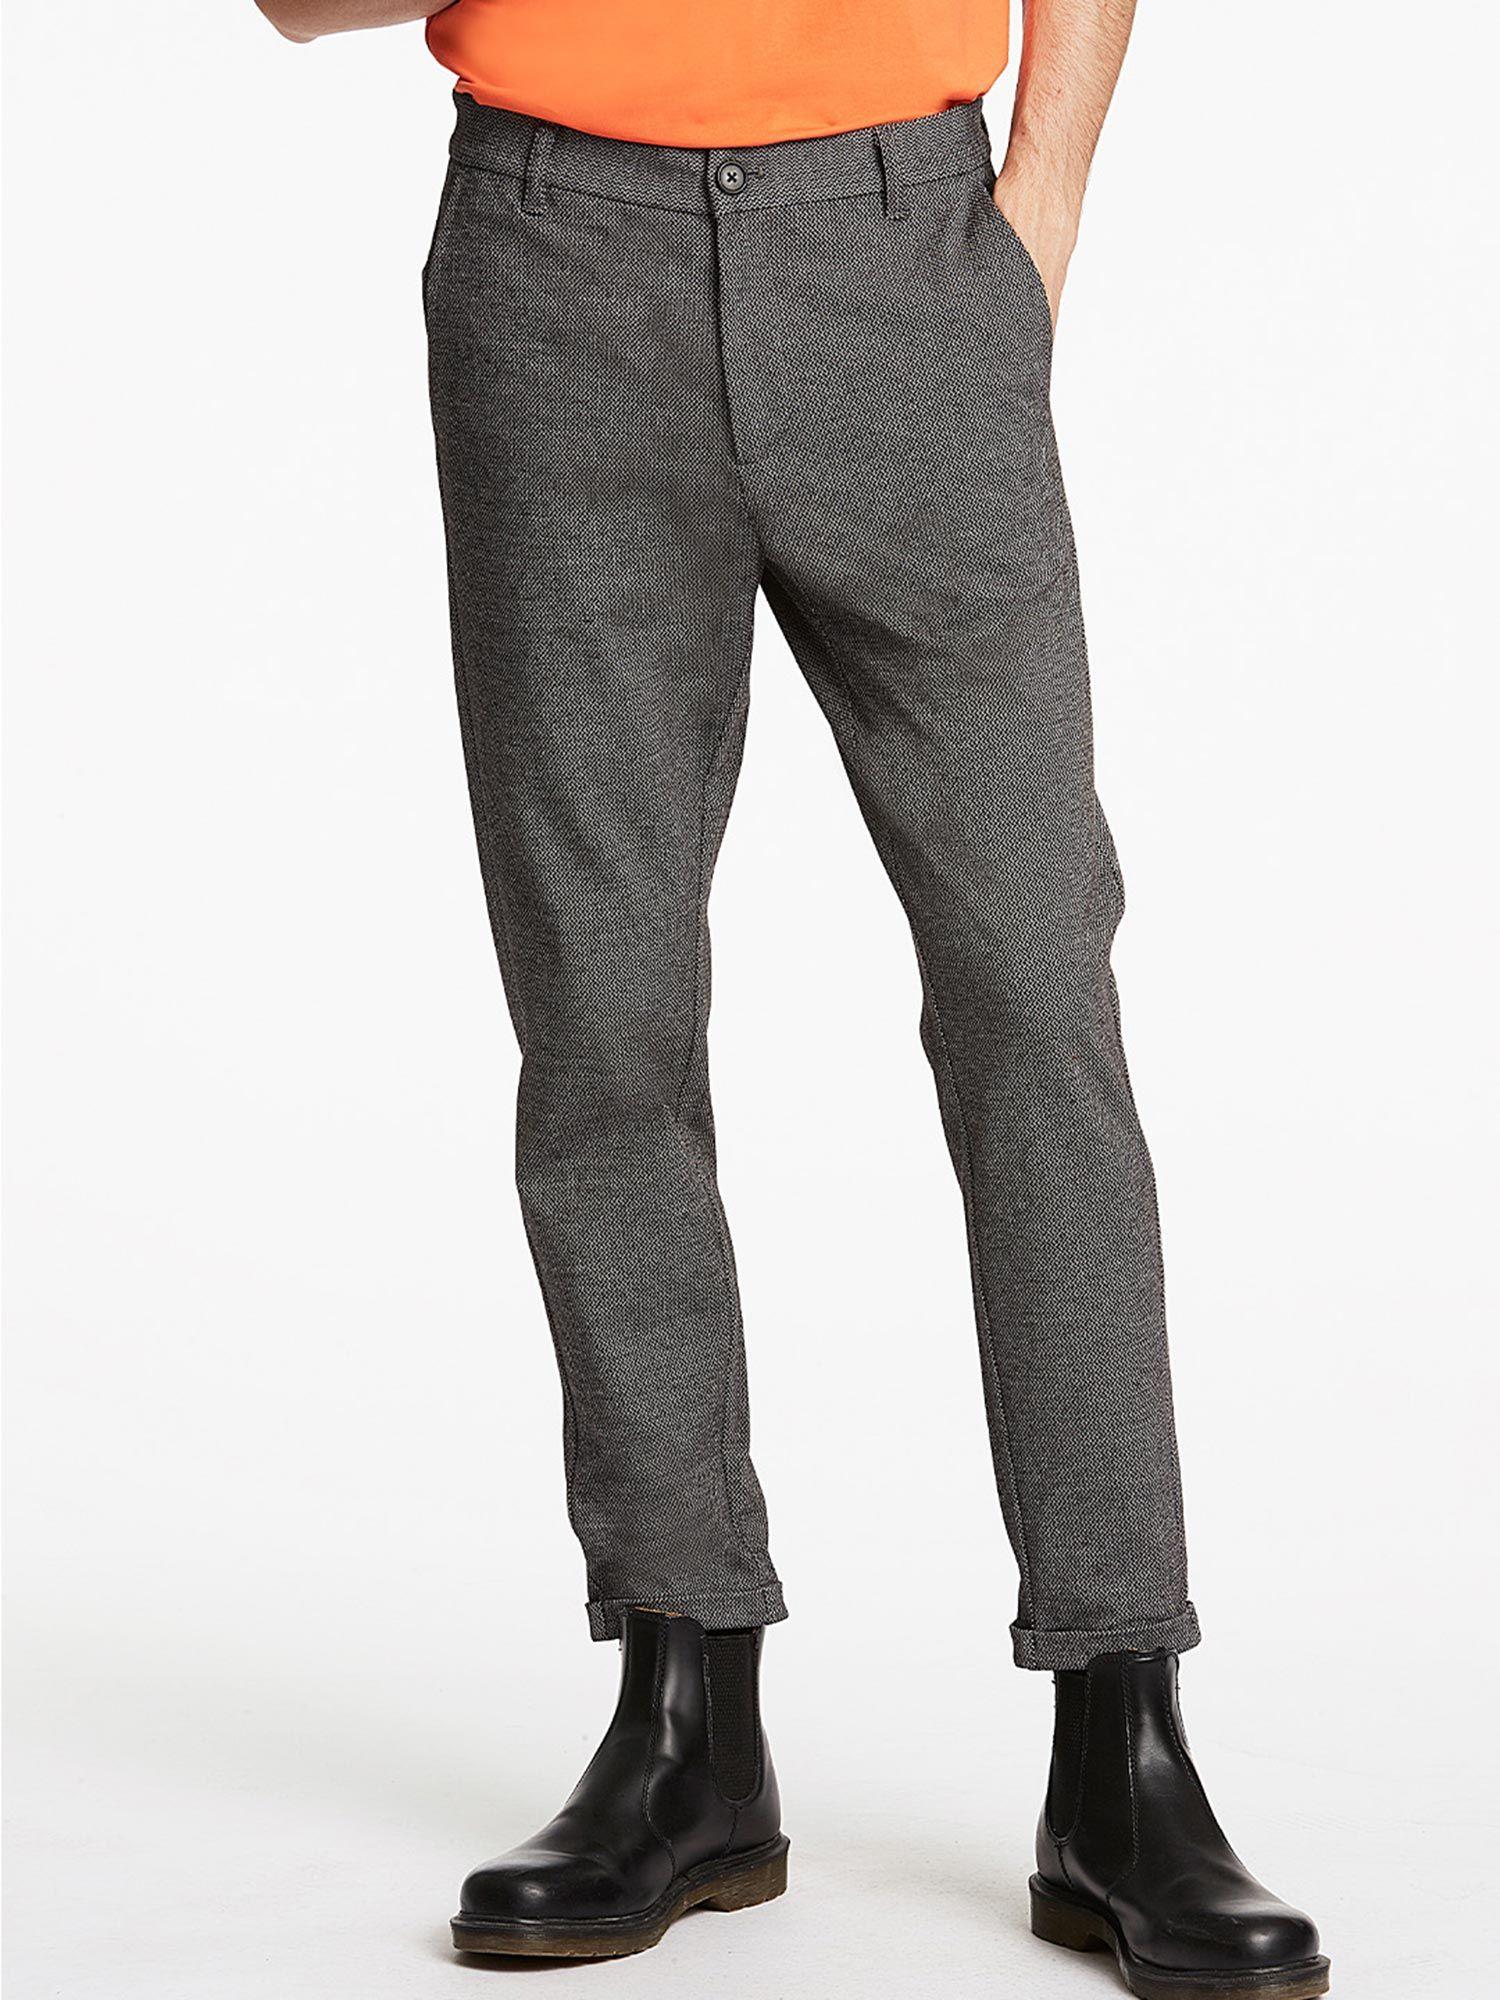 mens patterned mixed slim fit trousers